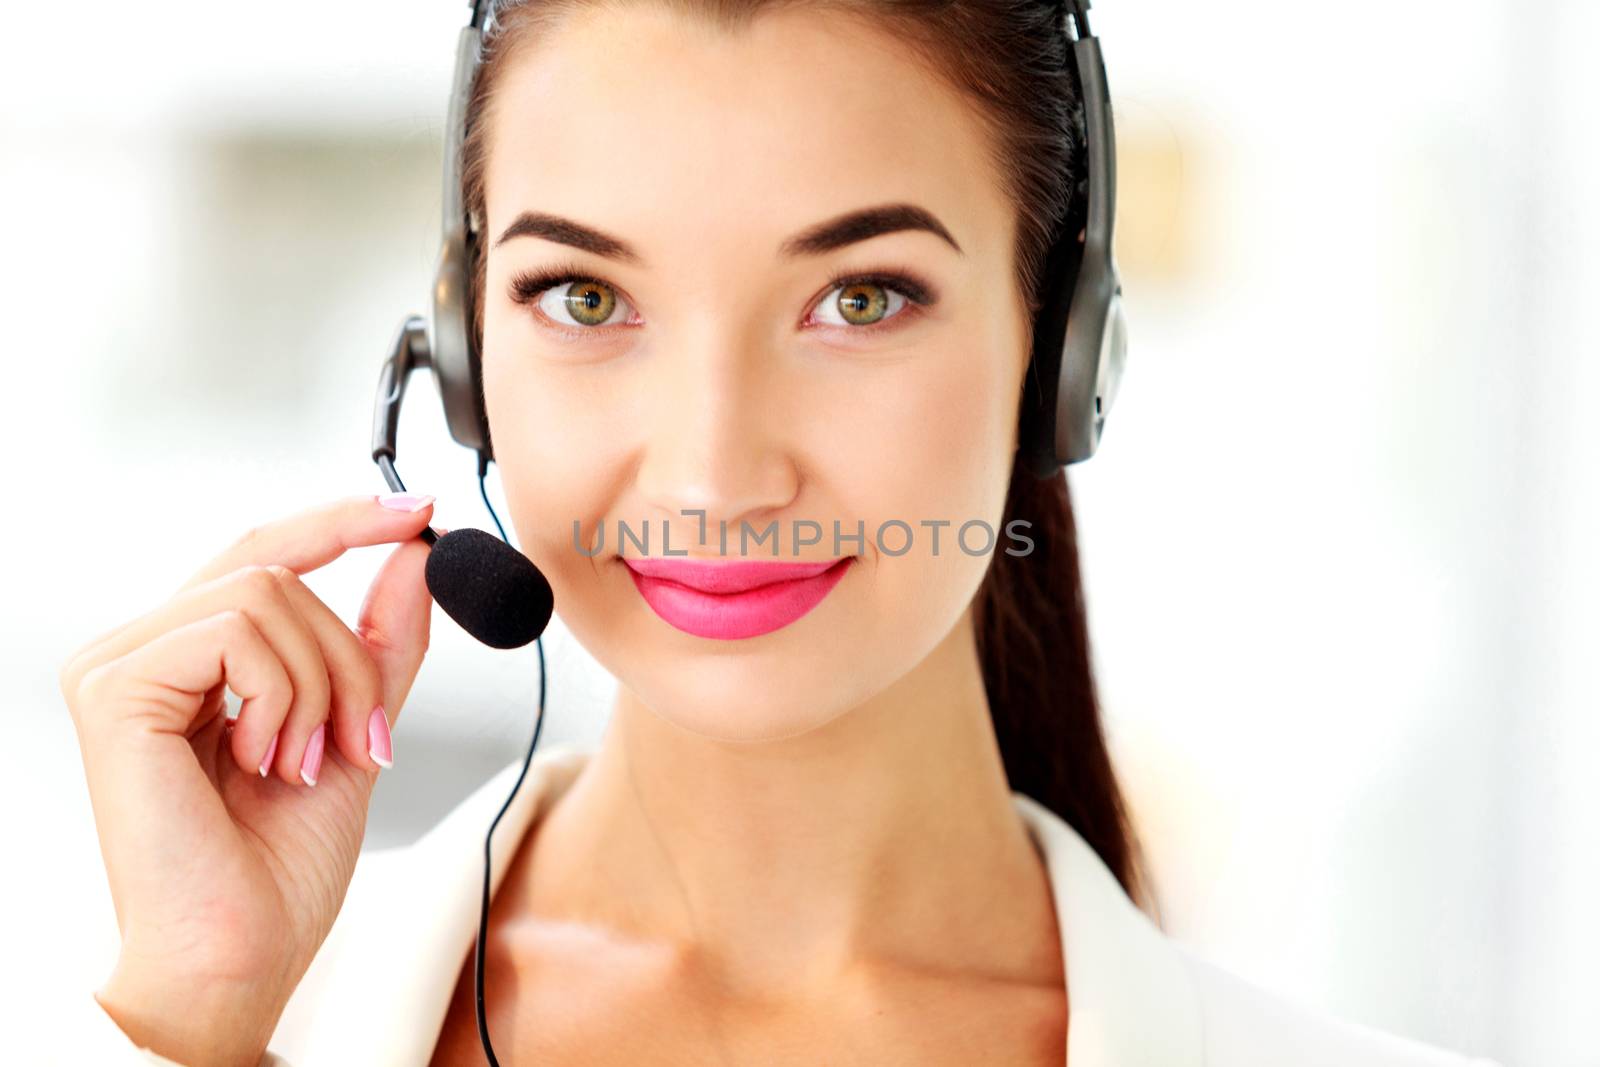 Closeup portrait of support phone operator in headset at workplace